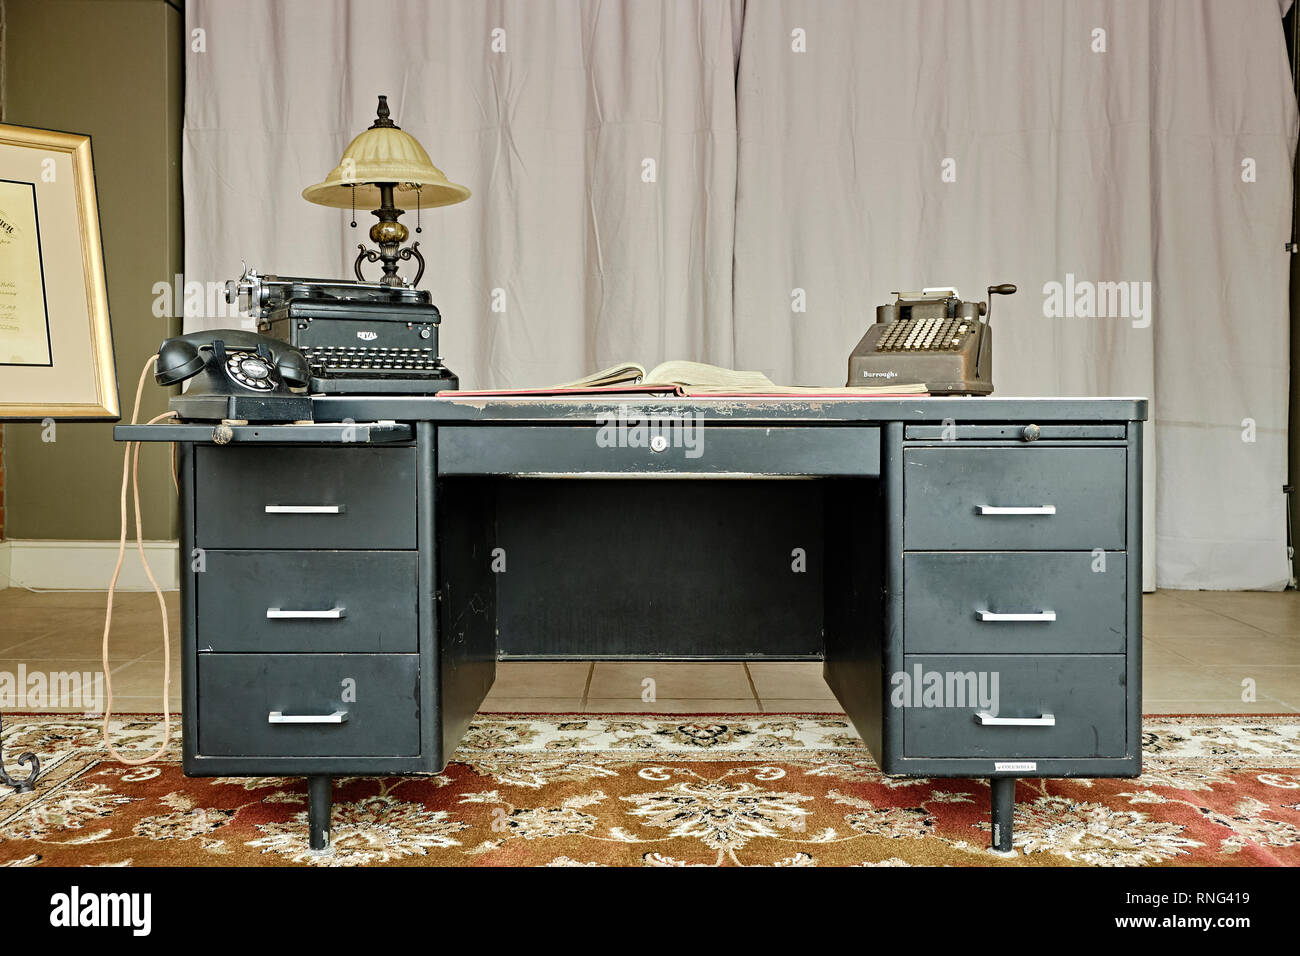 Antique Desk And Typewriter Stockfotos Antique Desk And